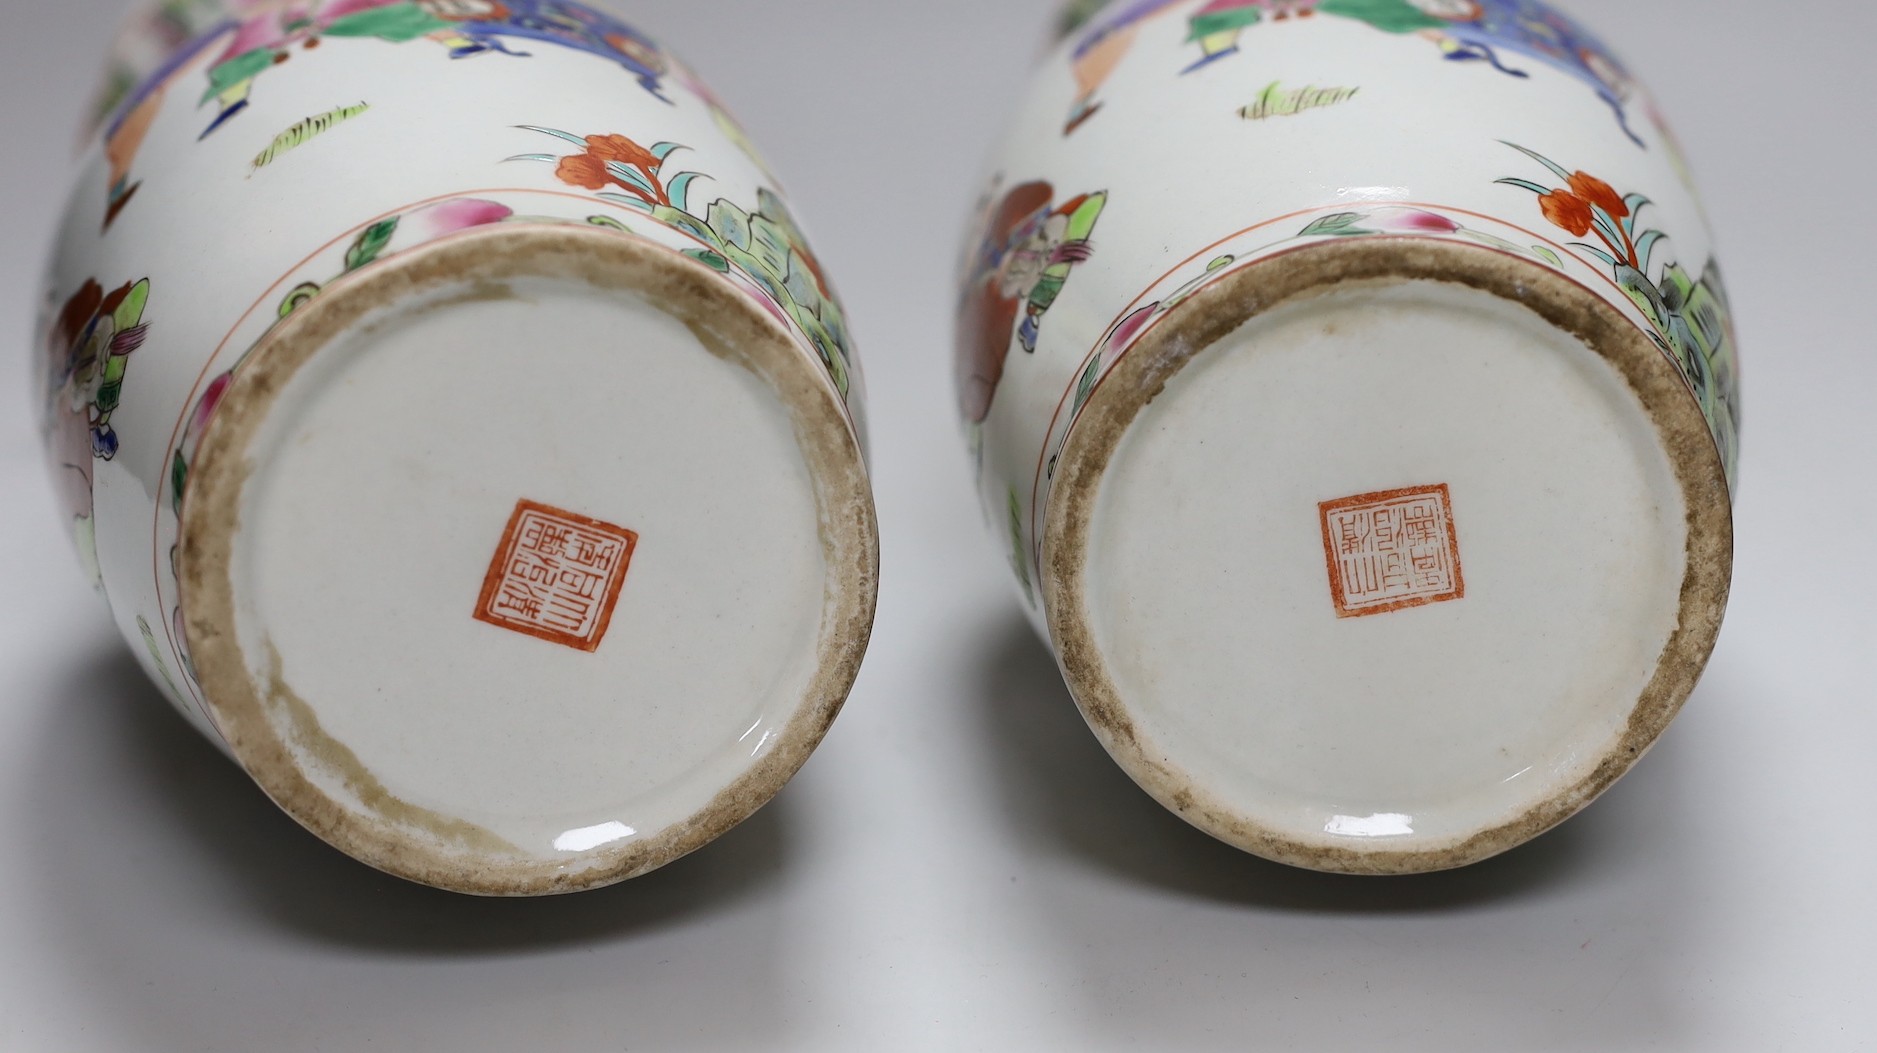 A pair of Chinese Famille Rose ‘boys’ vases, 25cms high